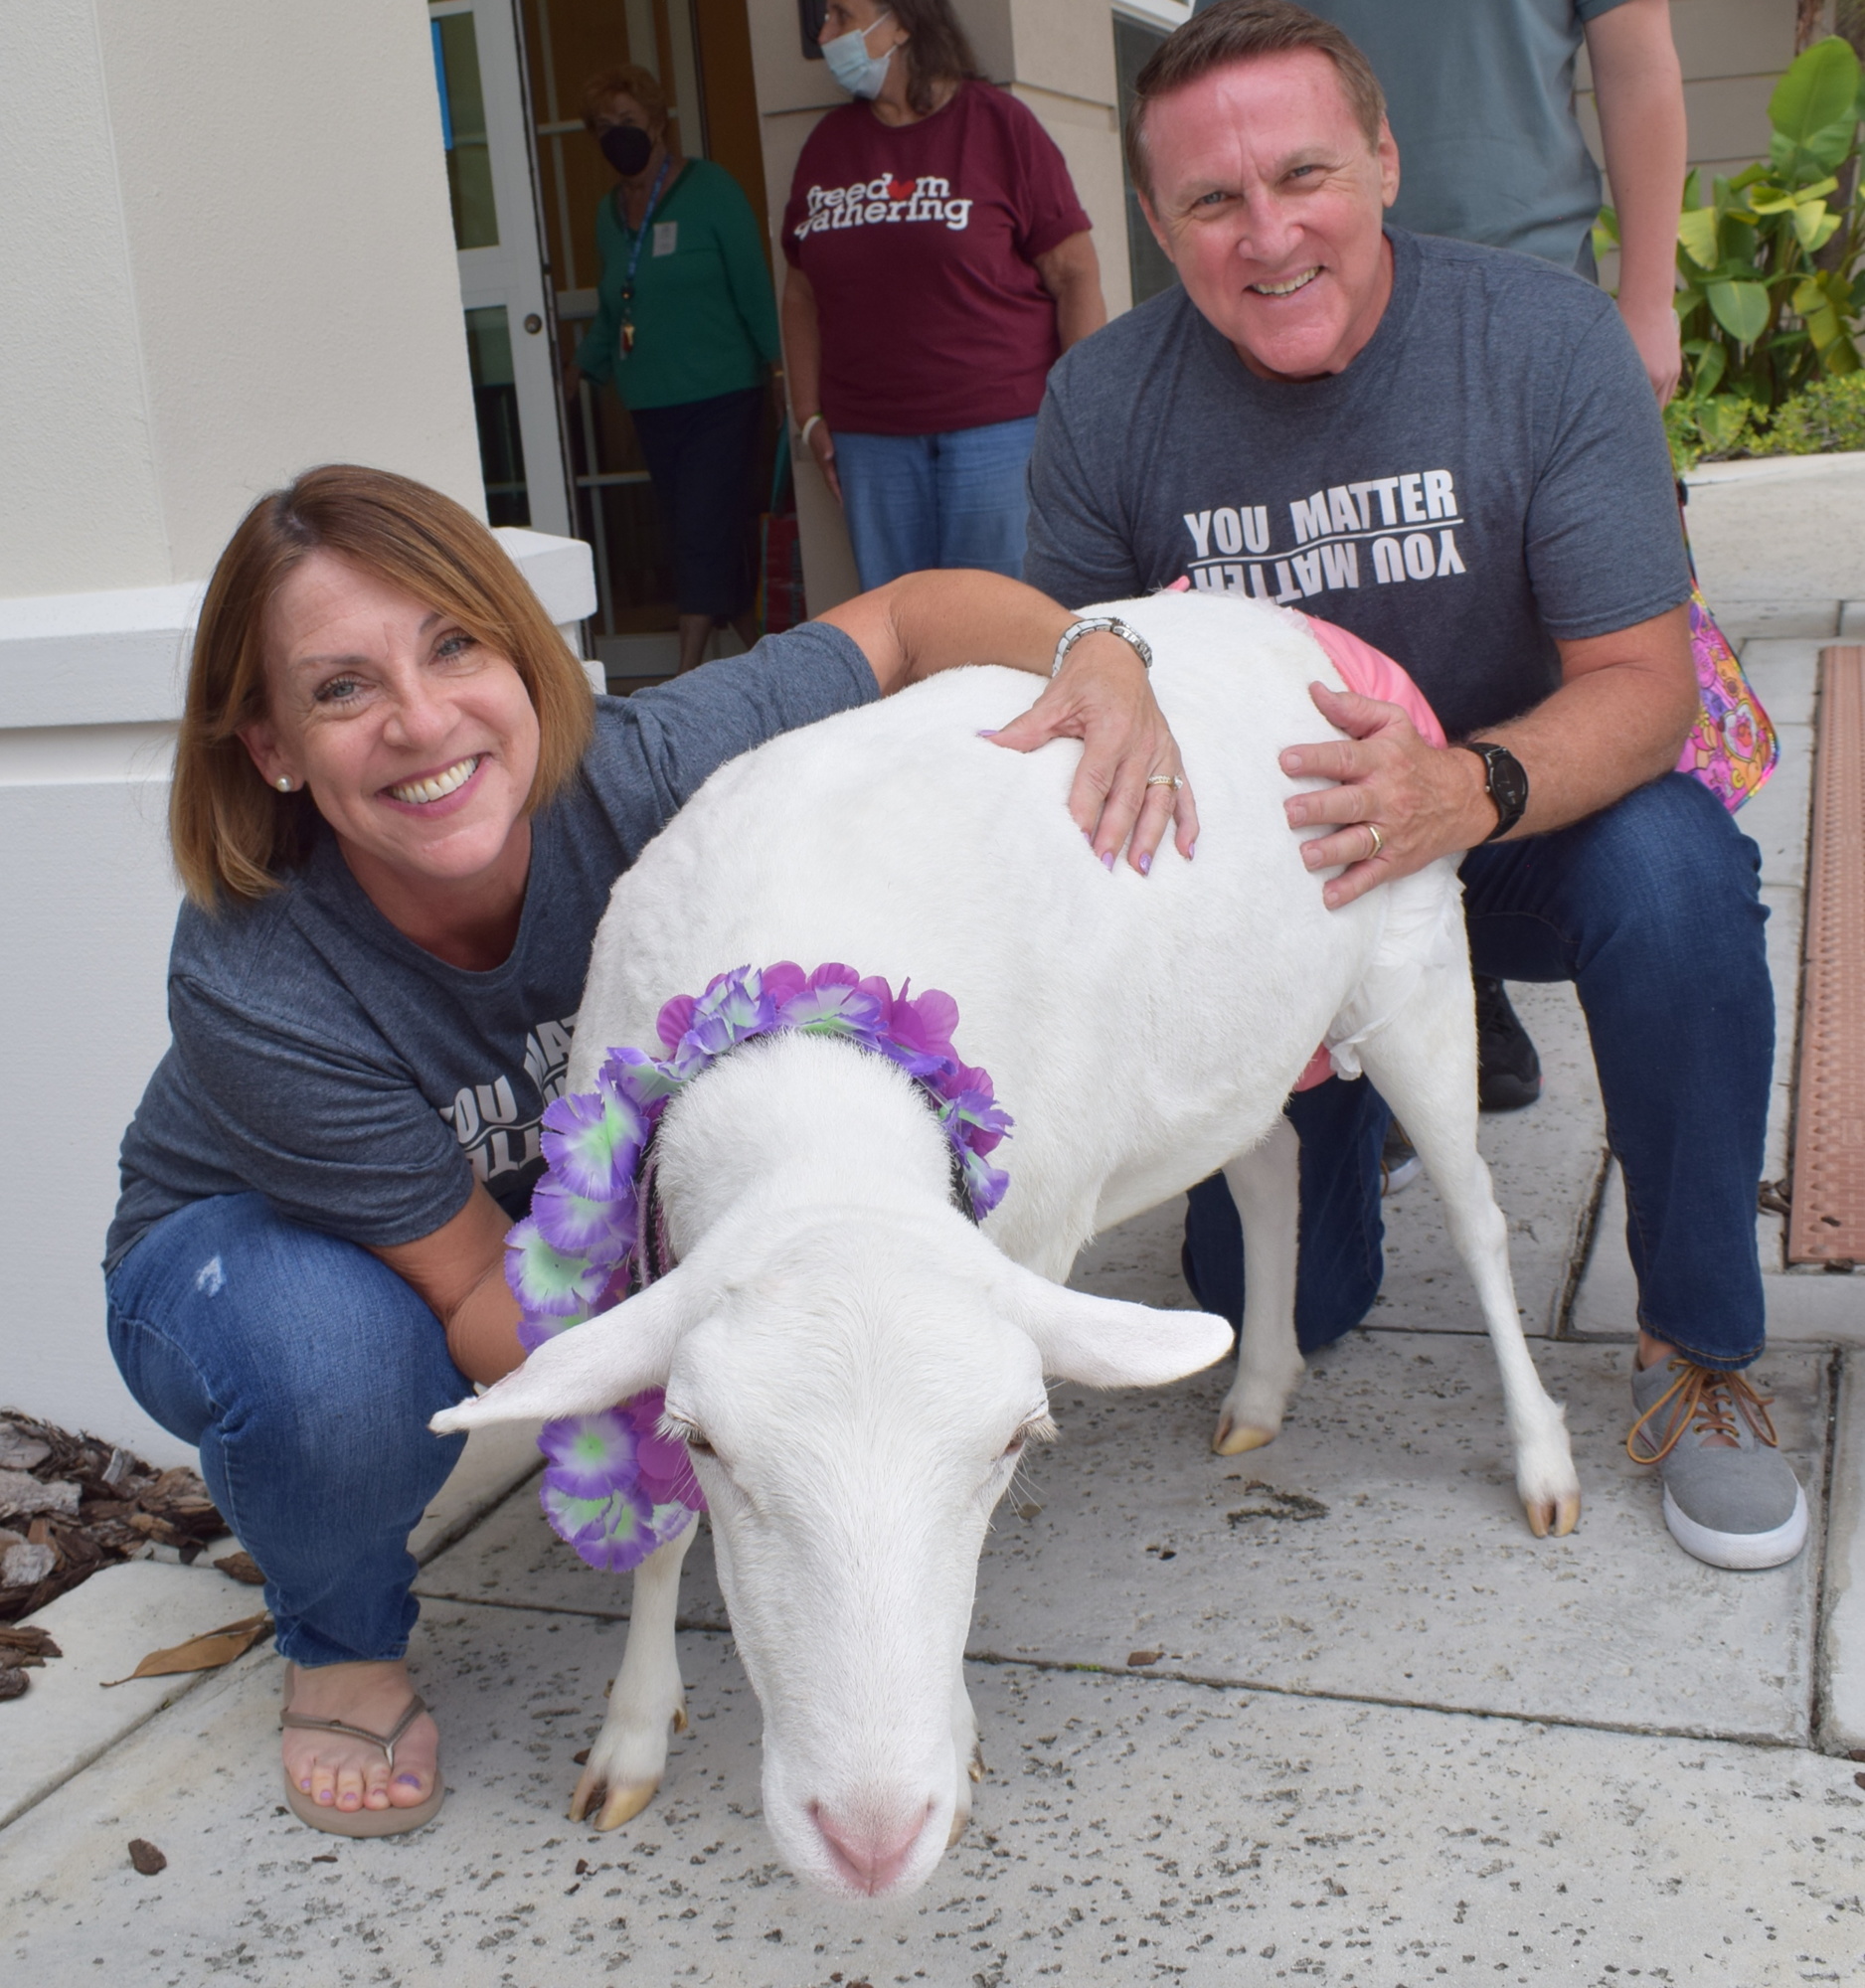 Vicki and Cliff Hofferbert of the Homebound Ministry of Woodland Community Church in Lakewood Ranch say Ivory brings unbelievable joy to all she meets. (Photo by Jay Heater)